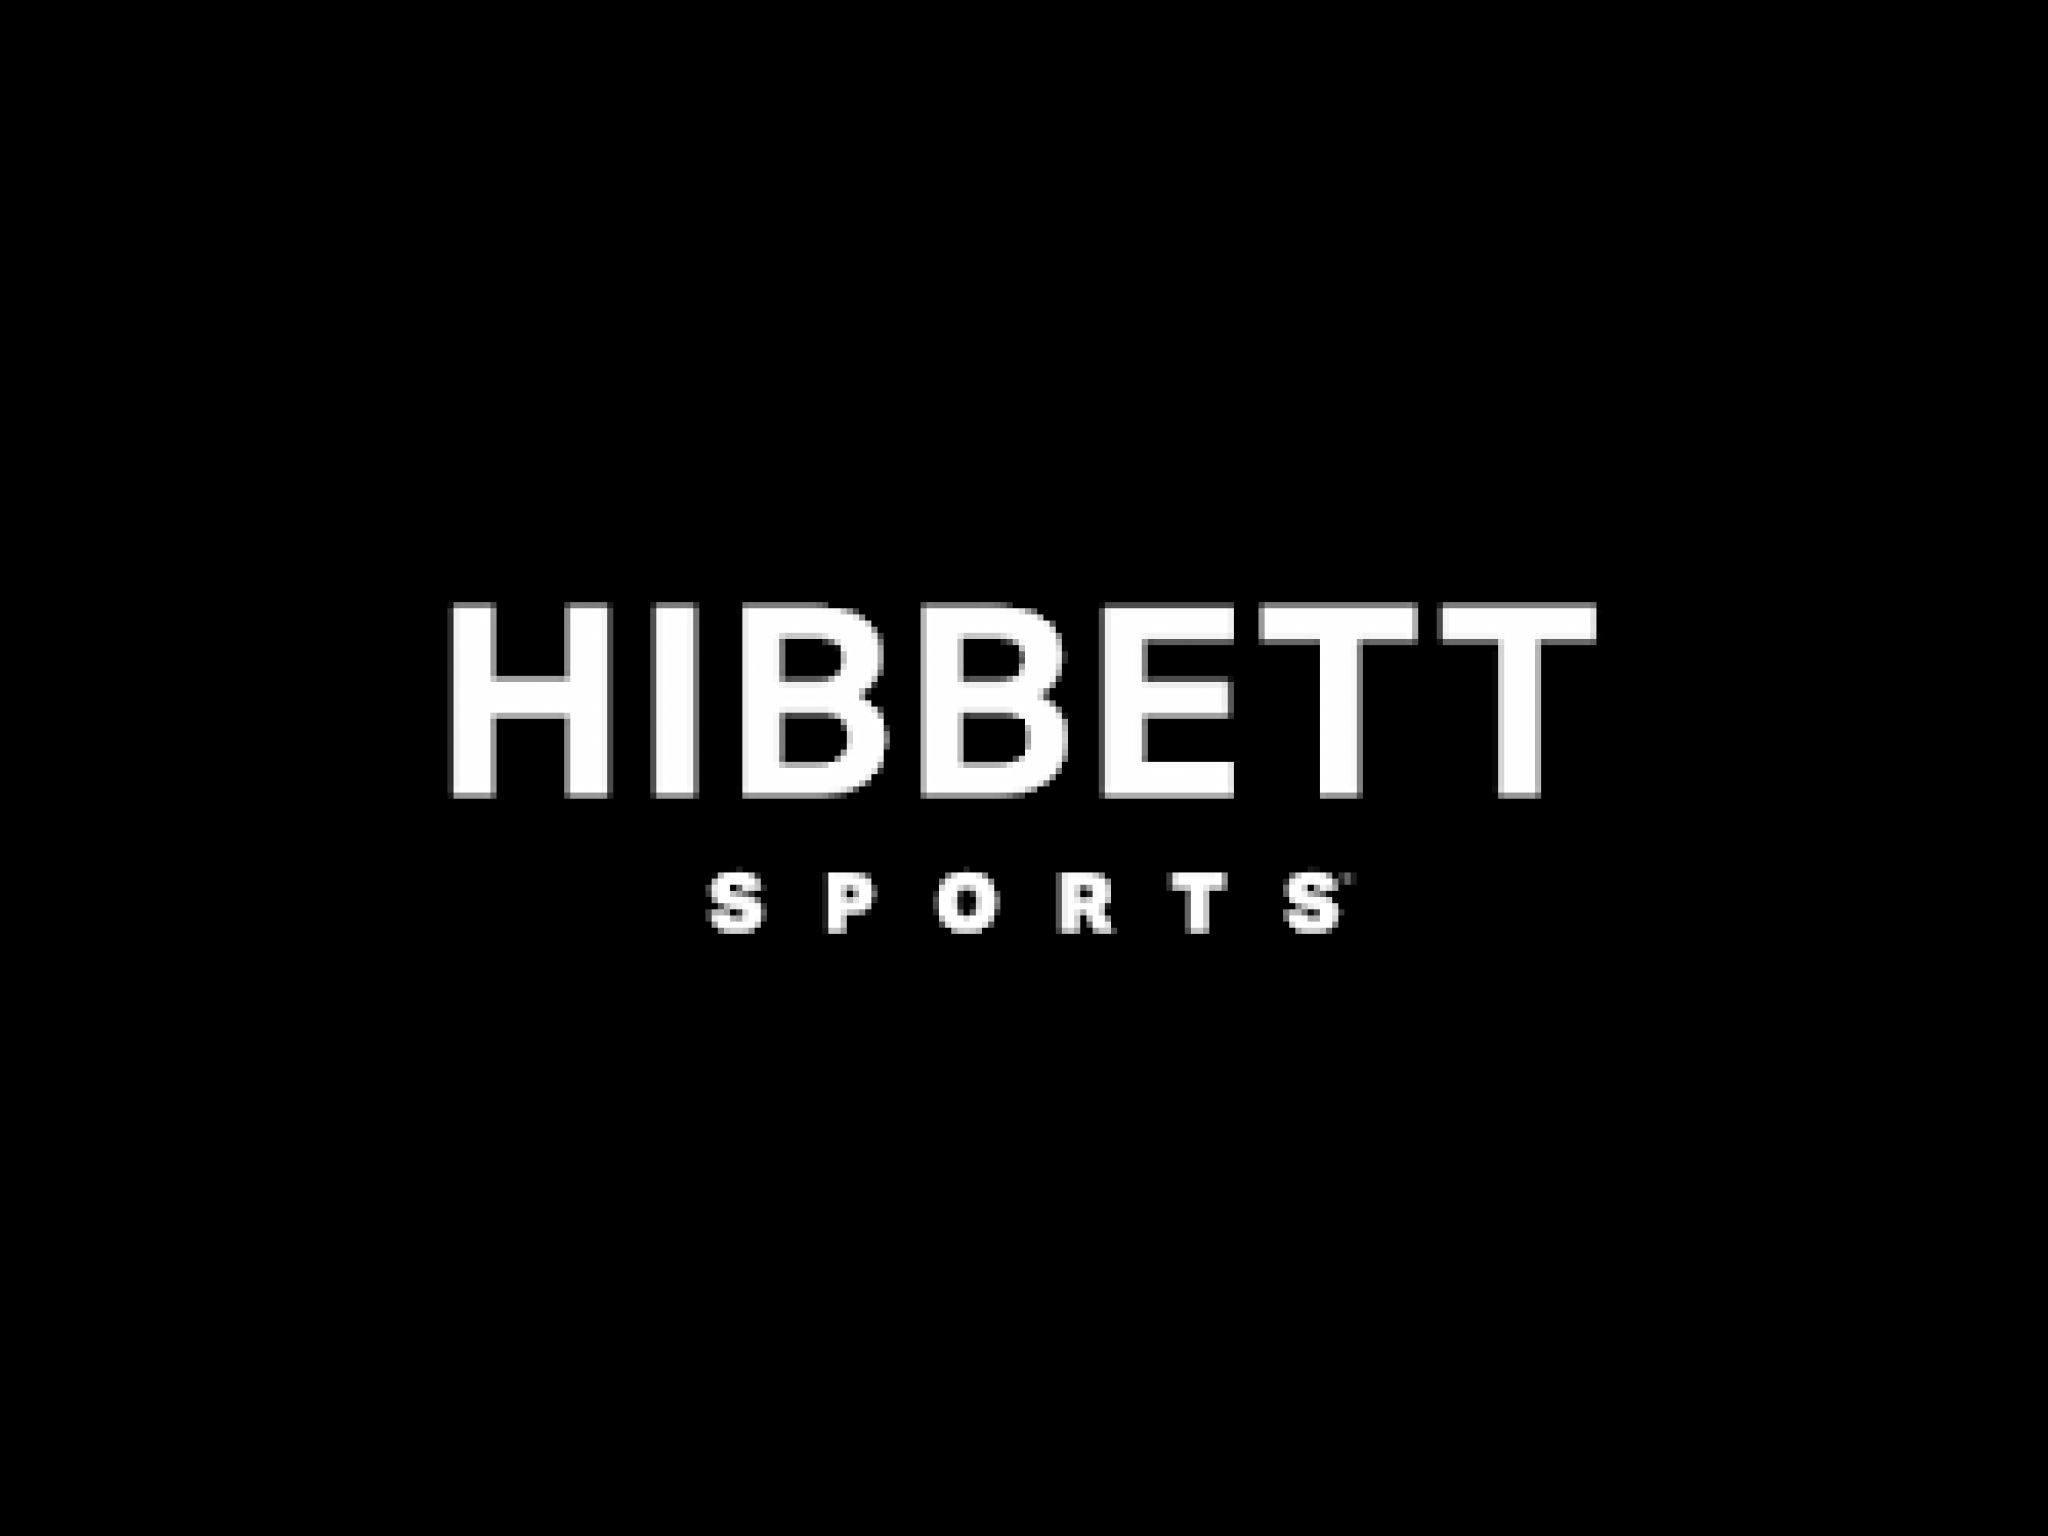  hibbett-enfusion-and-some-other-big-stocks-moving-lower-on-tuesday 